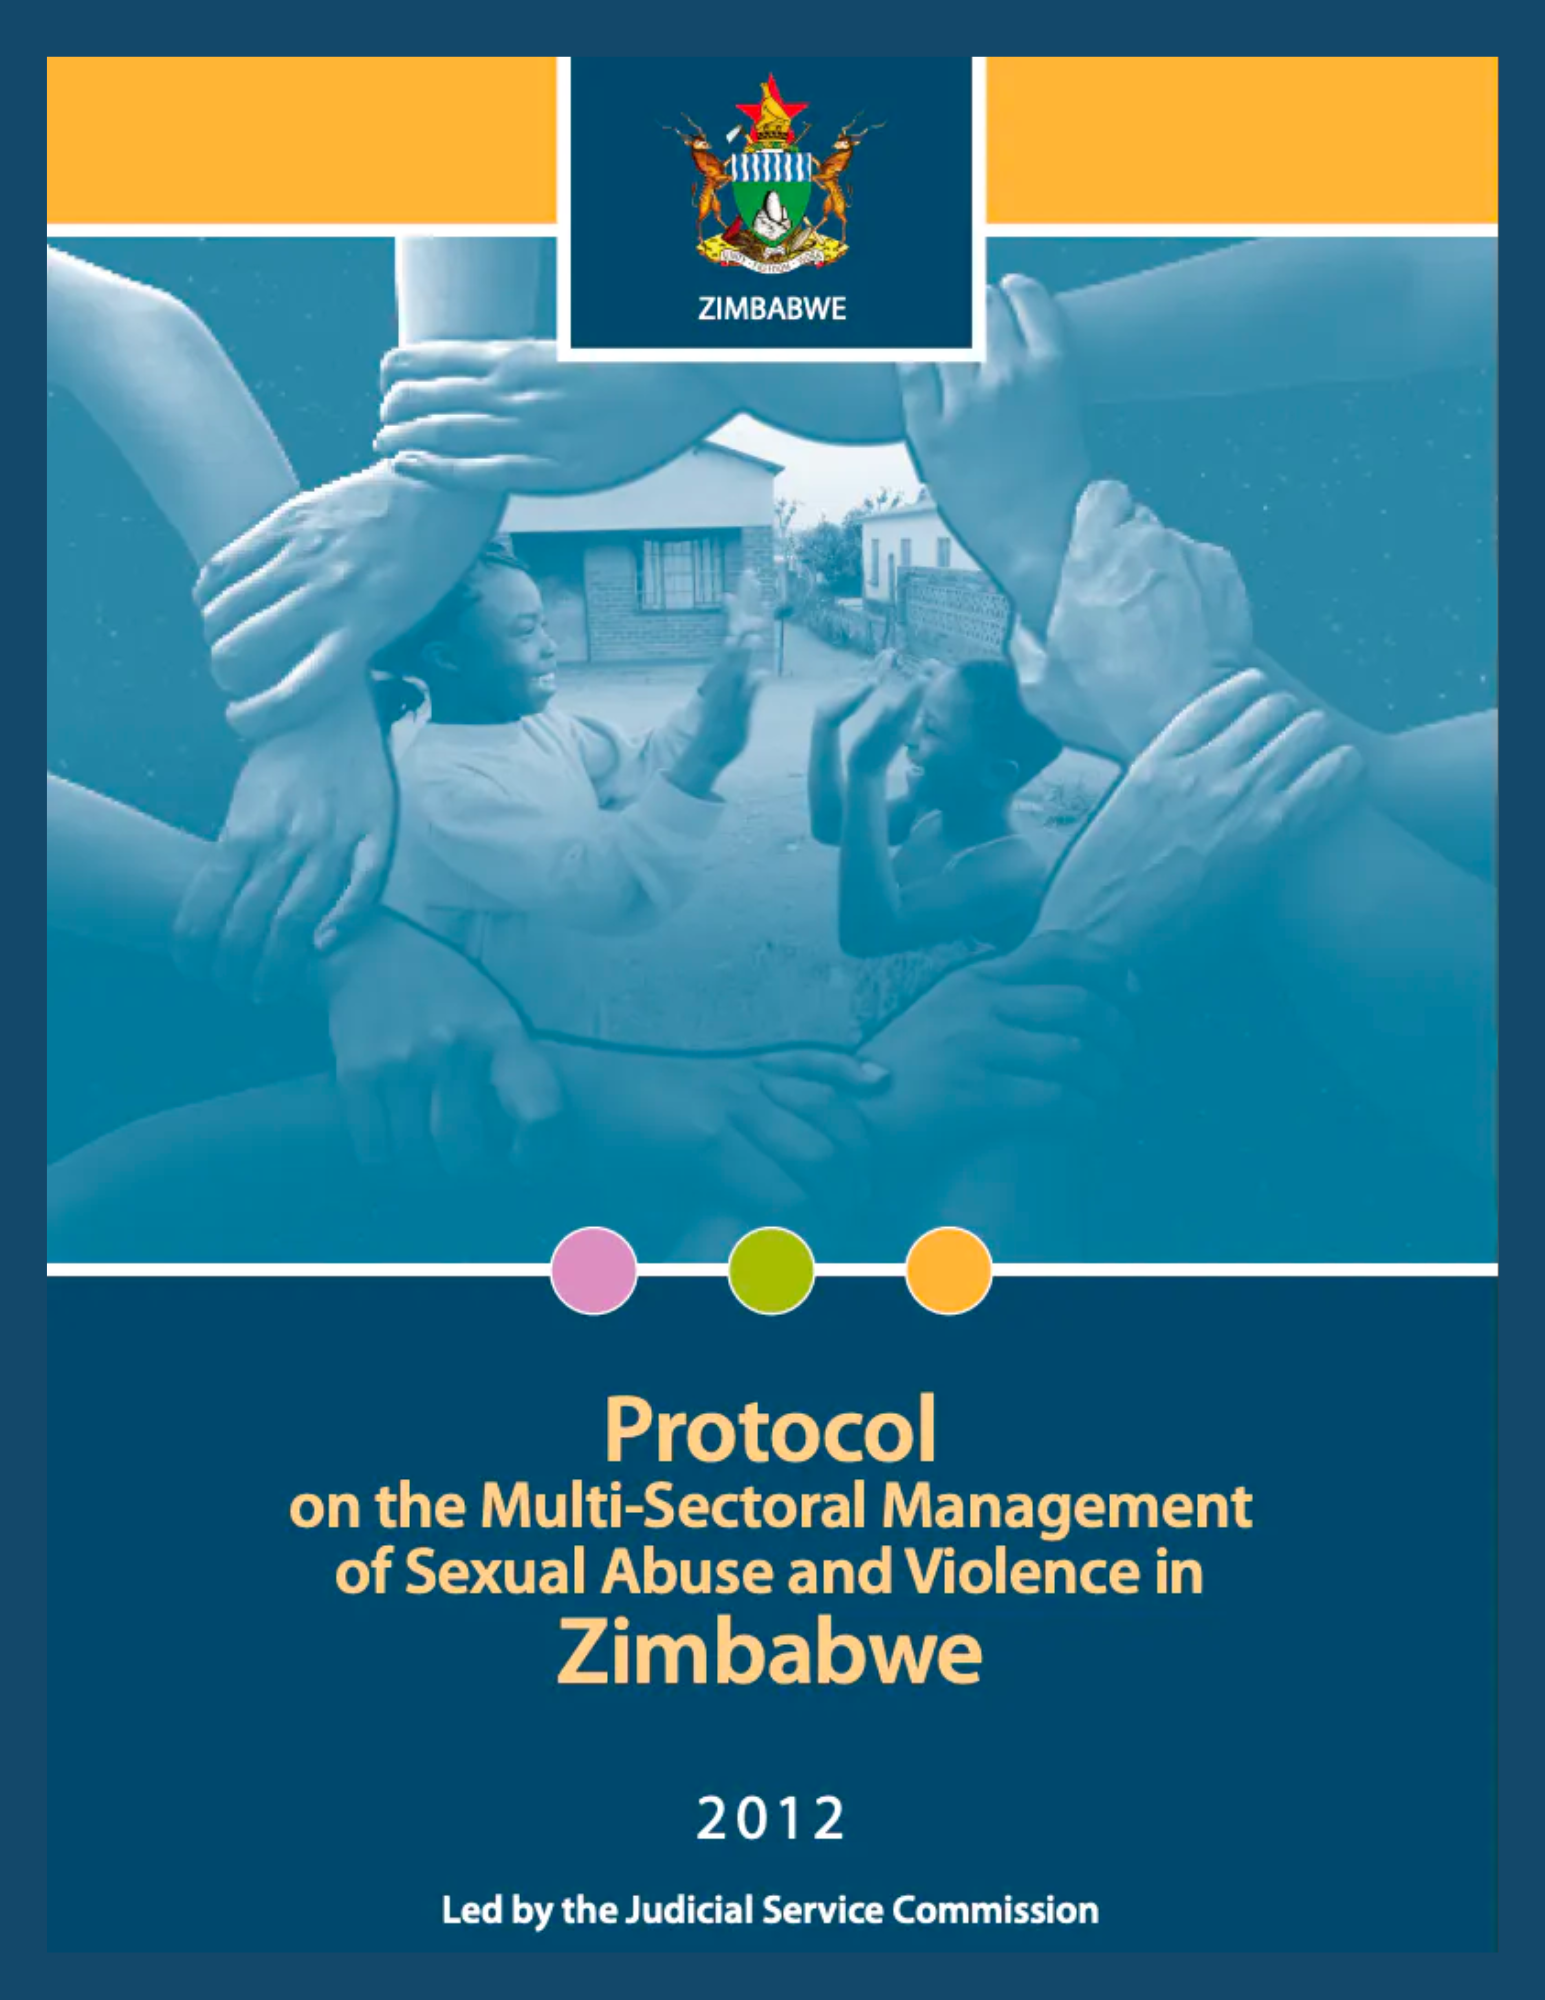 Protocol on the Multi-Sectoral Management of Sexual Abuse and Violence in Zimbabwe